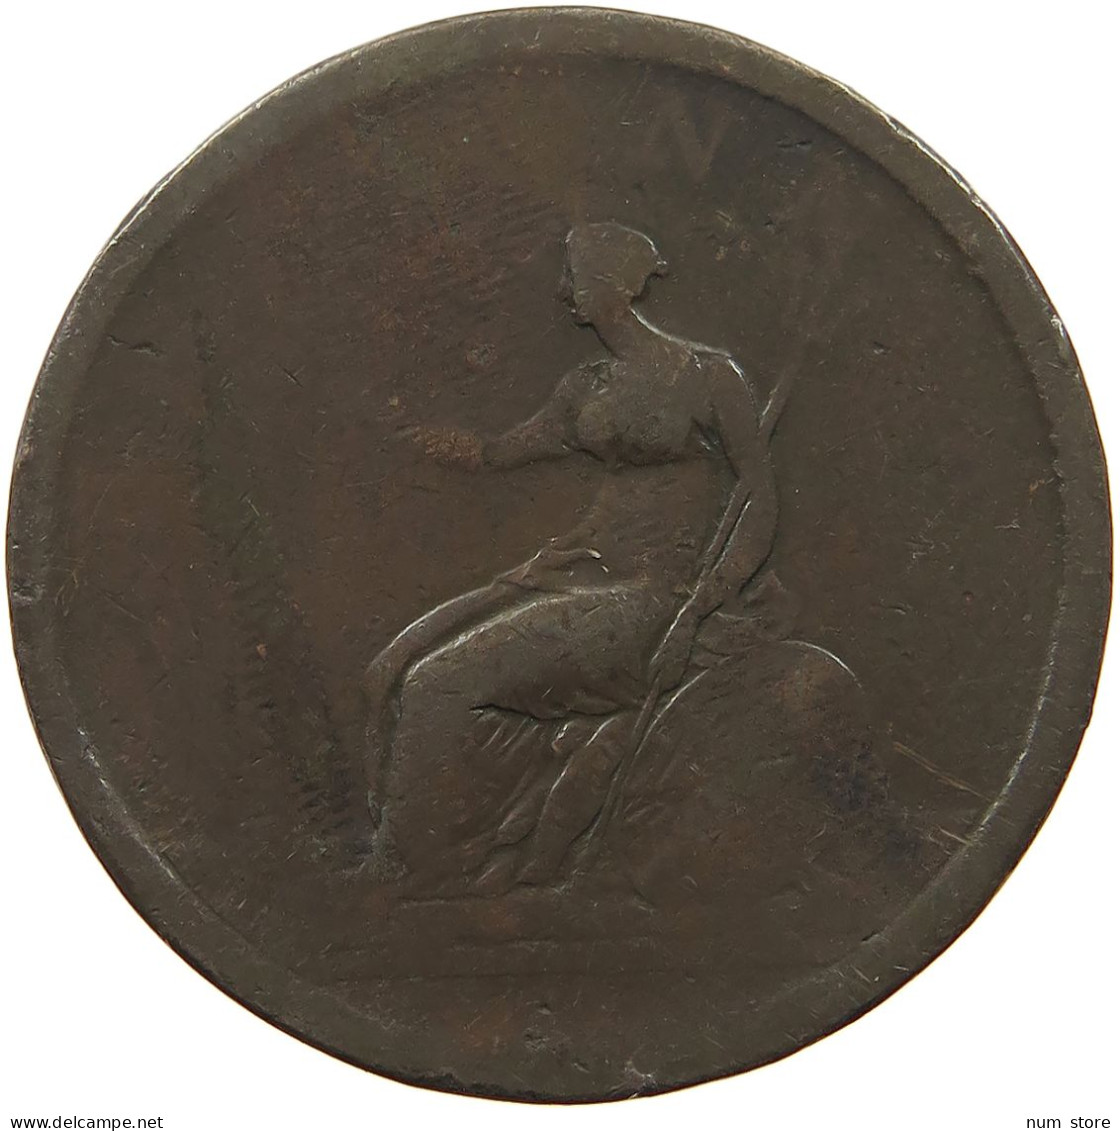 GREAT BRITAIN PENNY 1806 GEORGE III. 1760-1820 #sm05 0415 - C. 1 Penny